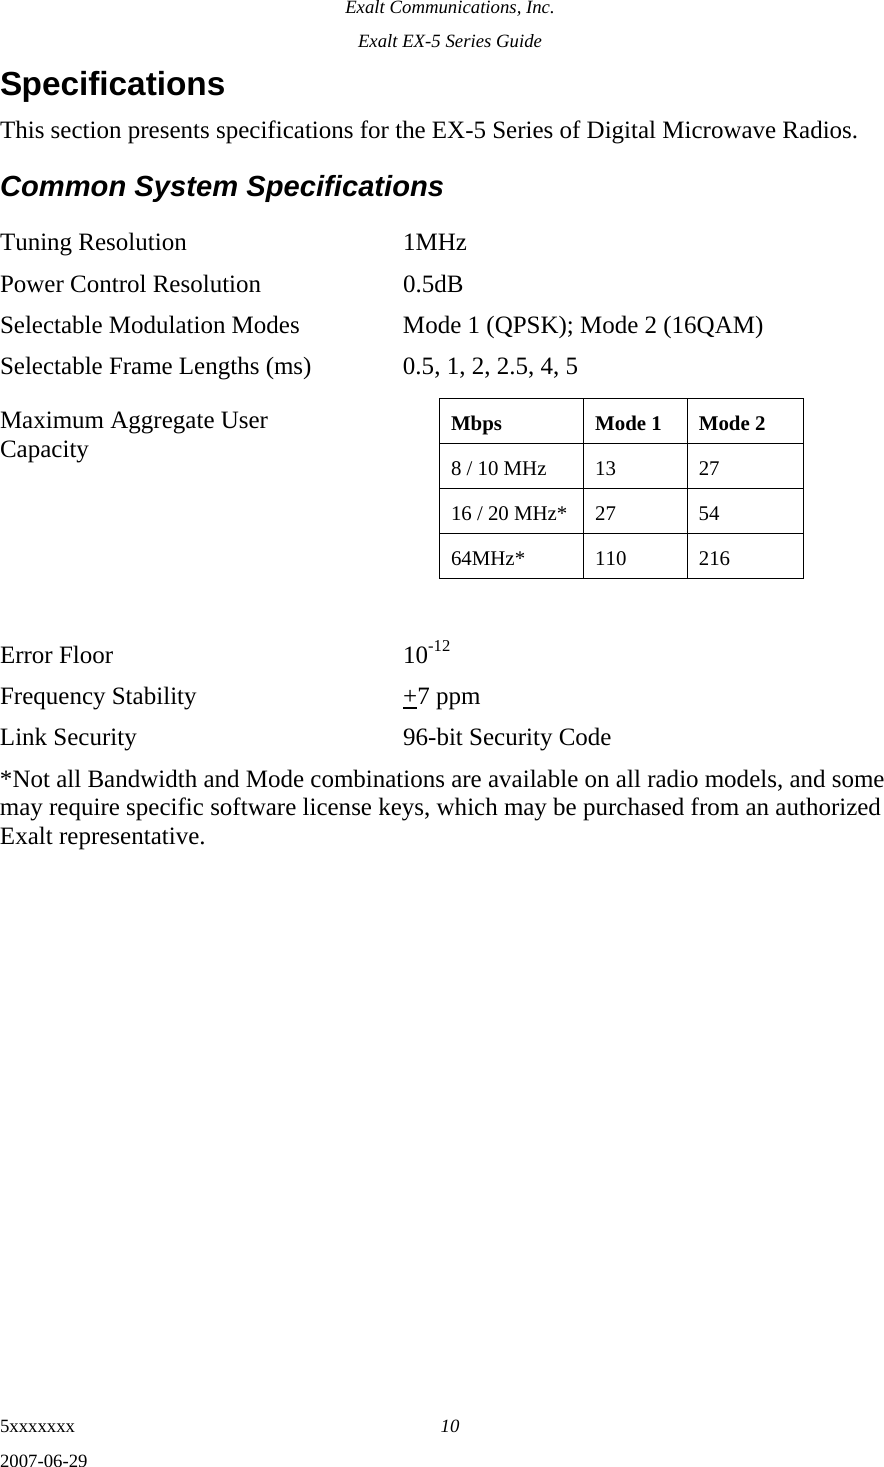 Exalt Communications, Inc. Exalt EX-5 Series Guide 5xxxxxxx  10 2007-06-29 Specifications This section presents specifications for the EX-5 Series of Digital Microwave Radios. Common System Specifications Tuning Resolution  1MHz  Power Control Resolution  0.5dB Selectable Modulation Modes  Mode 1 (QPSK); Mode 2 (16QAM) Selectable Frame Lengths (ms)  0.5, 1, 2, 2.5, 4, 5 Maximum Aggregate User Capacity      Error Floor  10-12 Frequency Stability  +7 ppm Link Security  96-bit Security Code *Not all Bandwidth and Mode combinations are available on all radio models, and some may require specific software license keys, which may be purchased from an authorized Exalt representative. Mbps  Mode 1  Mode 2 8 / 10 MHz  13  27 16 / 20 MHz*  27  54 64MHz* 110 216 